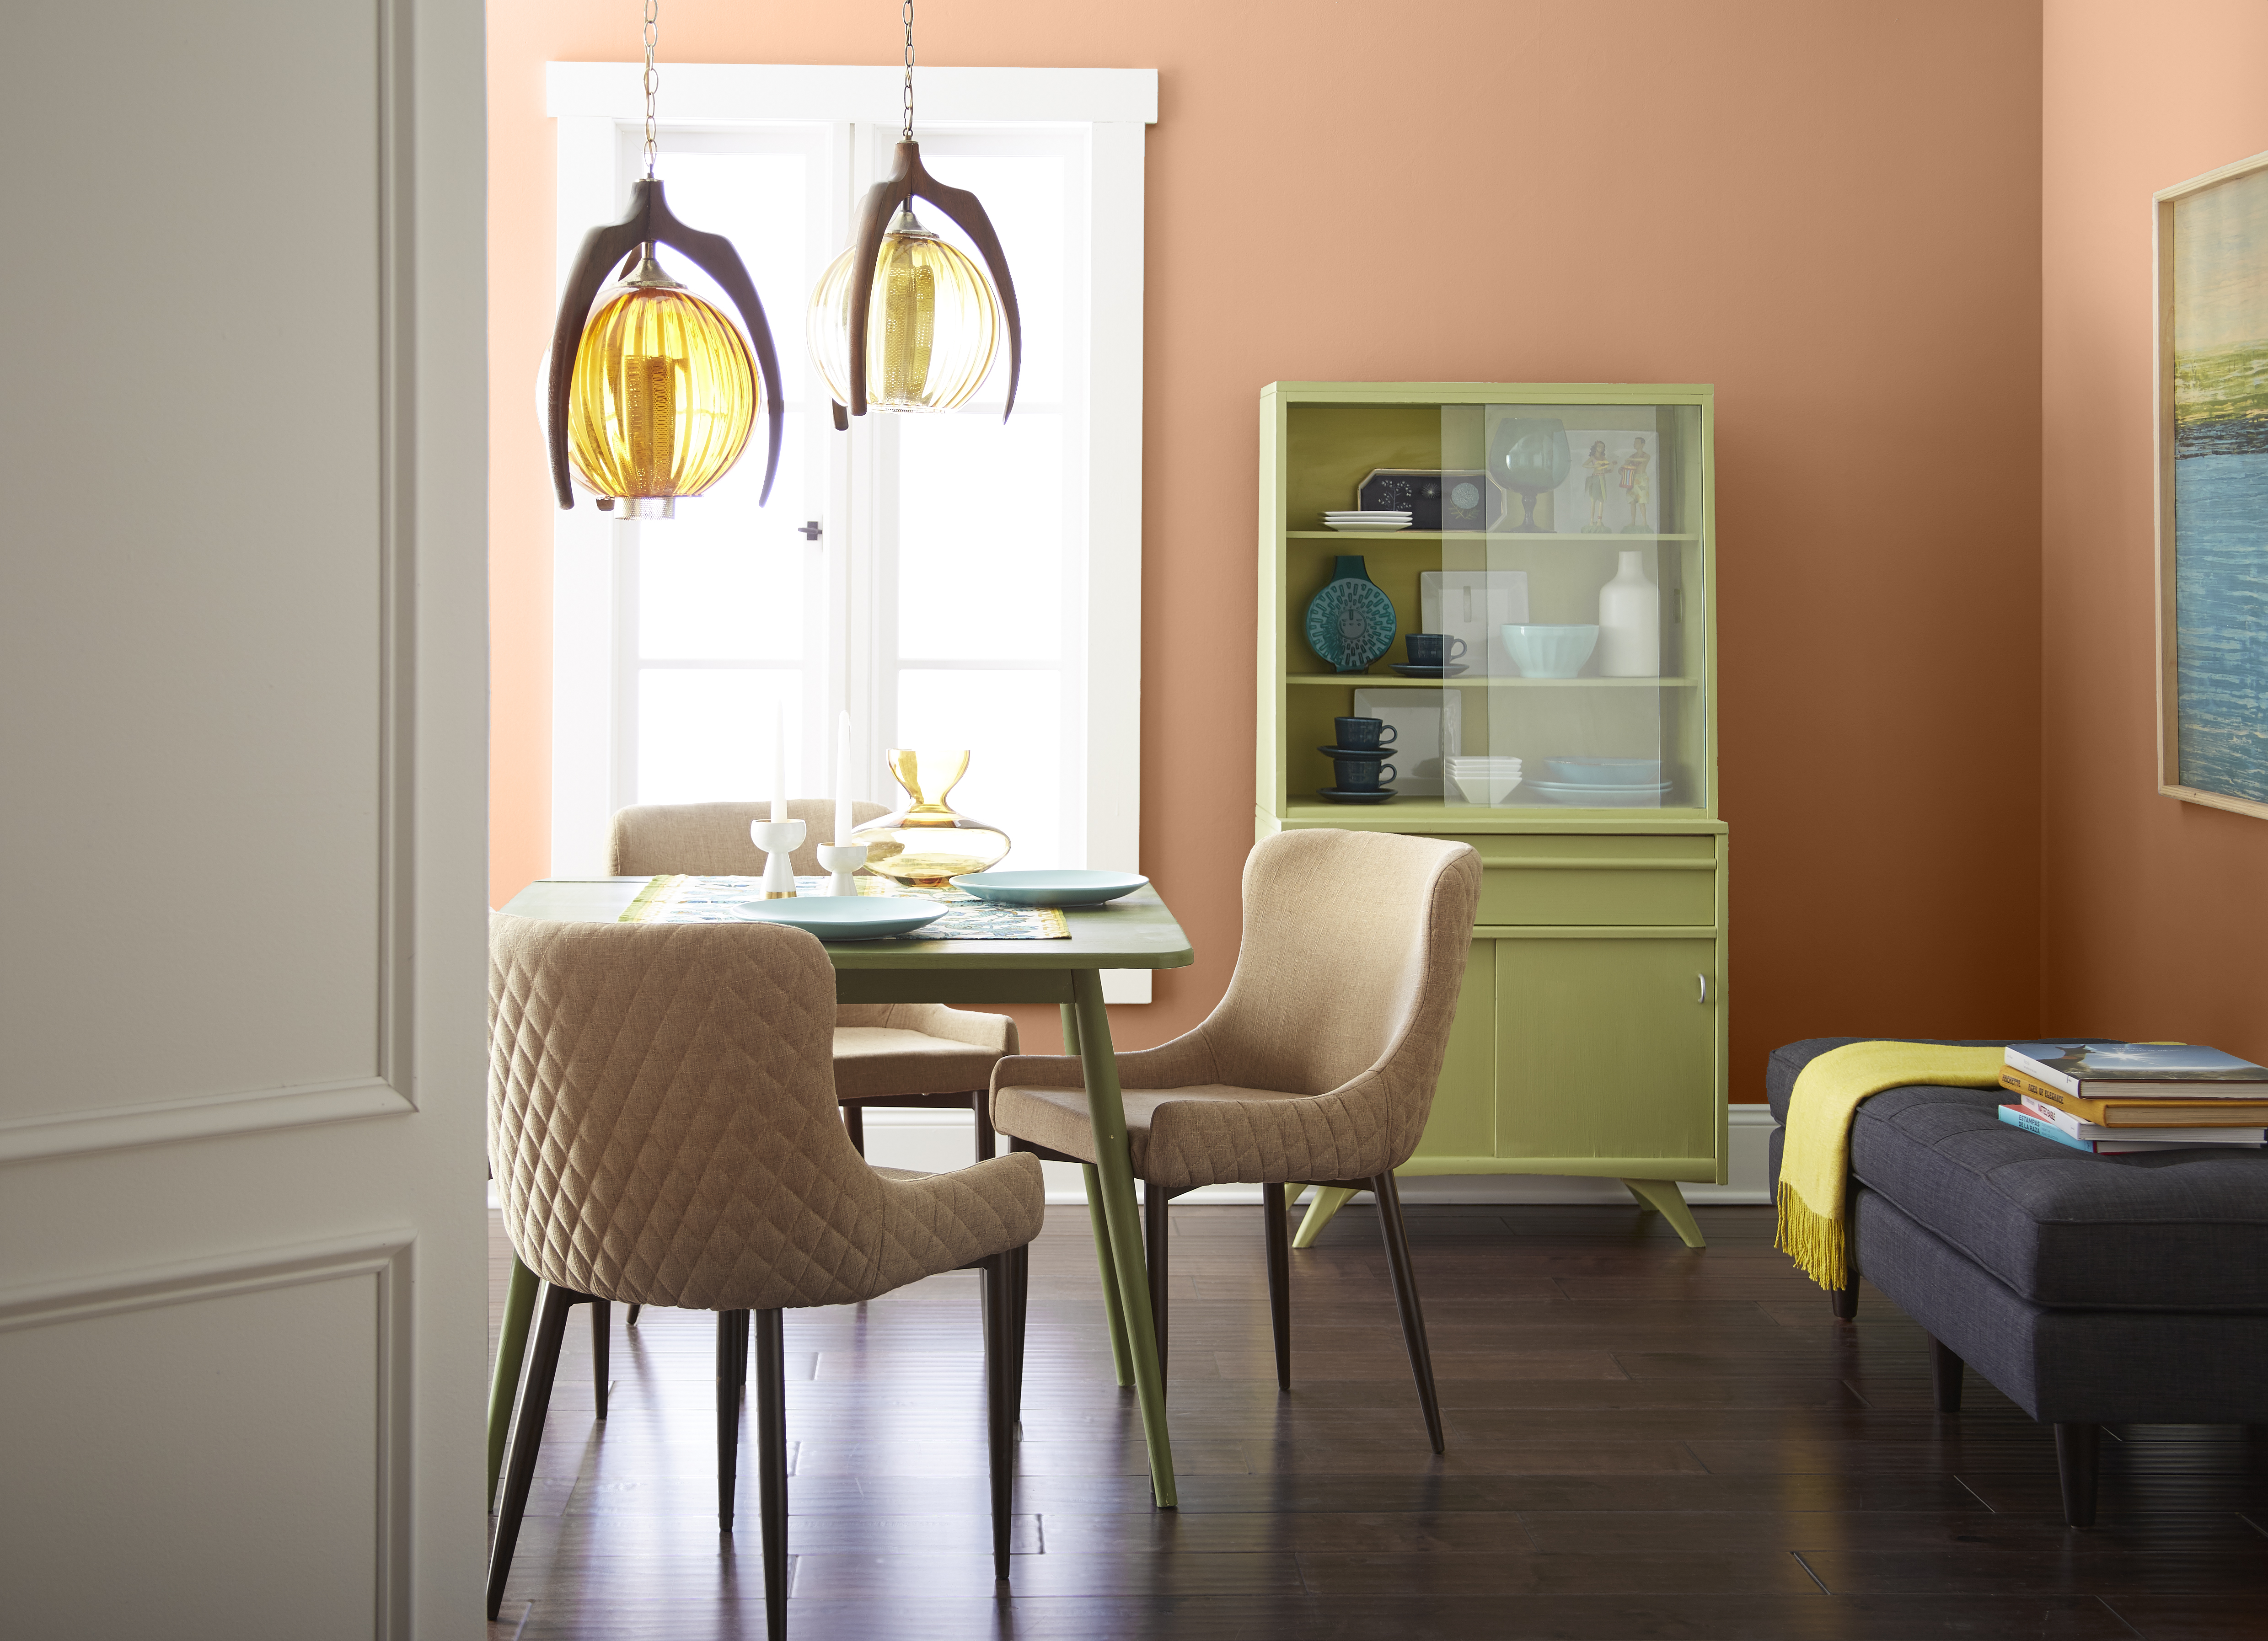 A mid-century dining room area with retro furniture pieces painted in bright pastel yellow-green color.  The terra cotta color on the wall coordinates nicely with the furniture keeping it from looking for bright but rather warm and welcoming. 